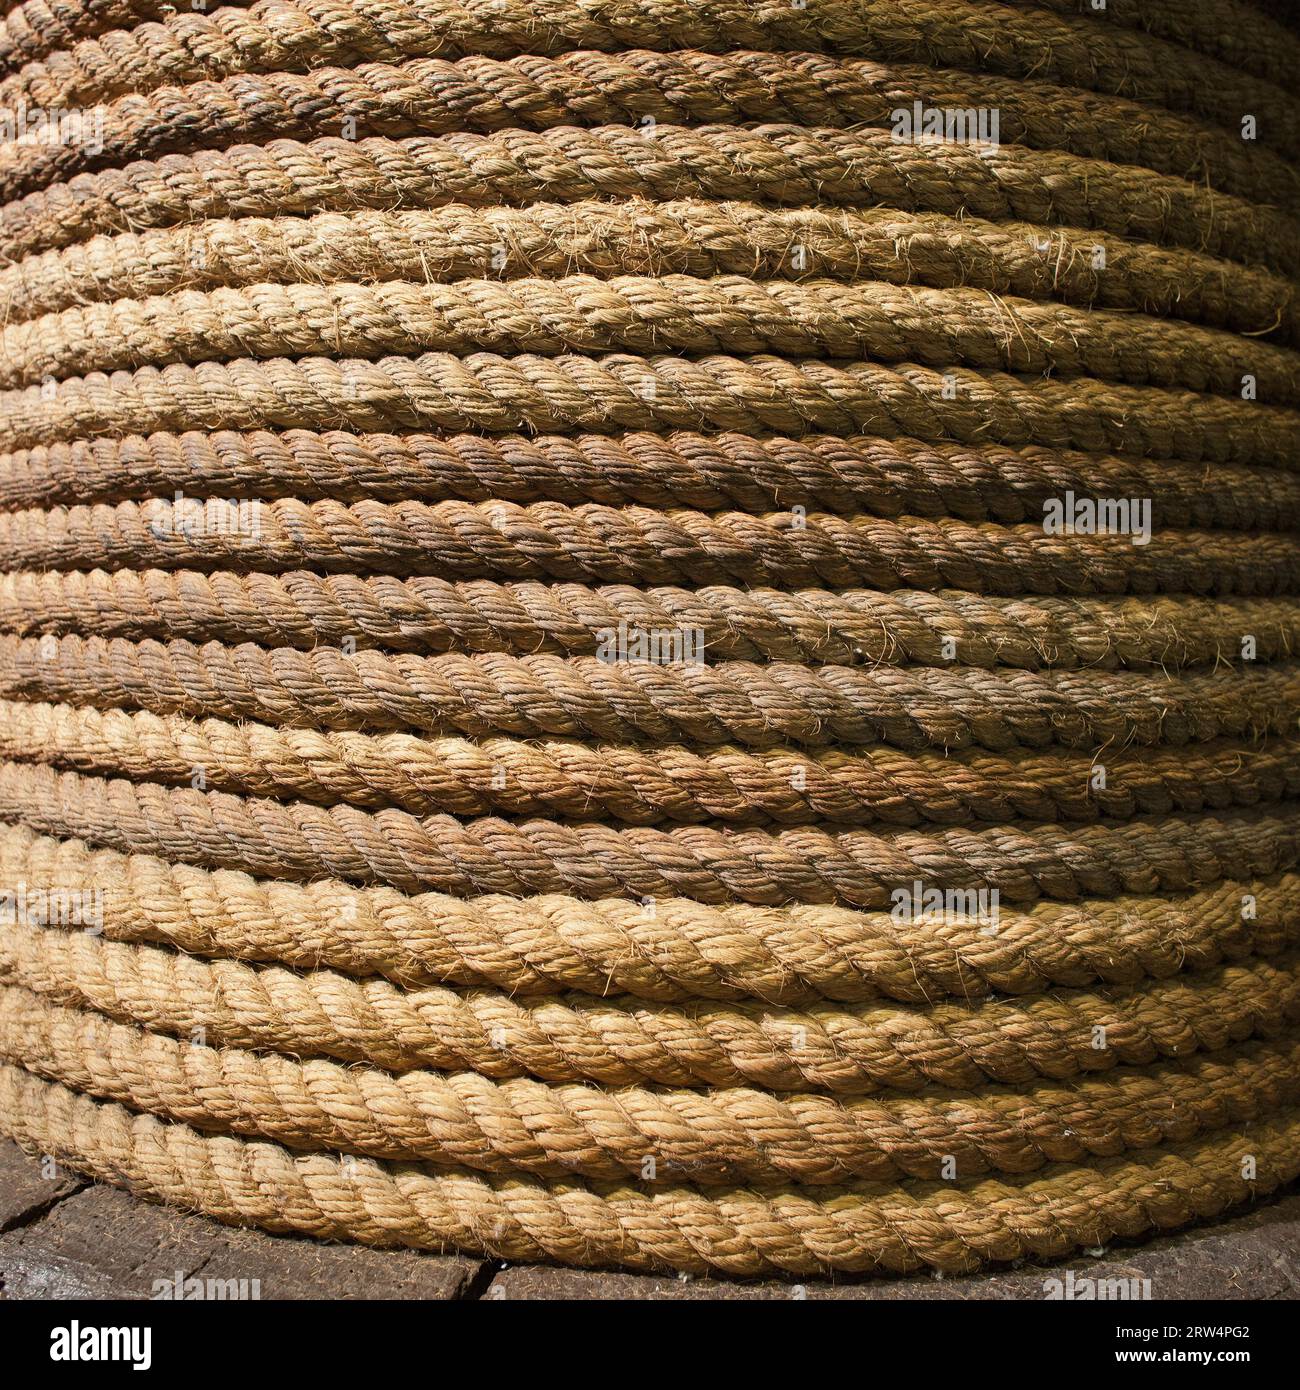 An old coiled, thick, long, strong rope background Stock Photo